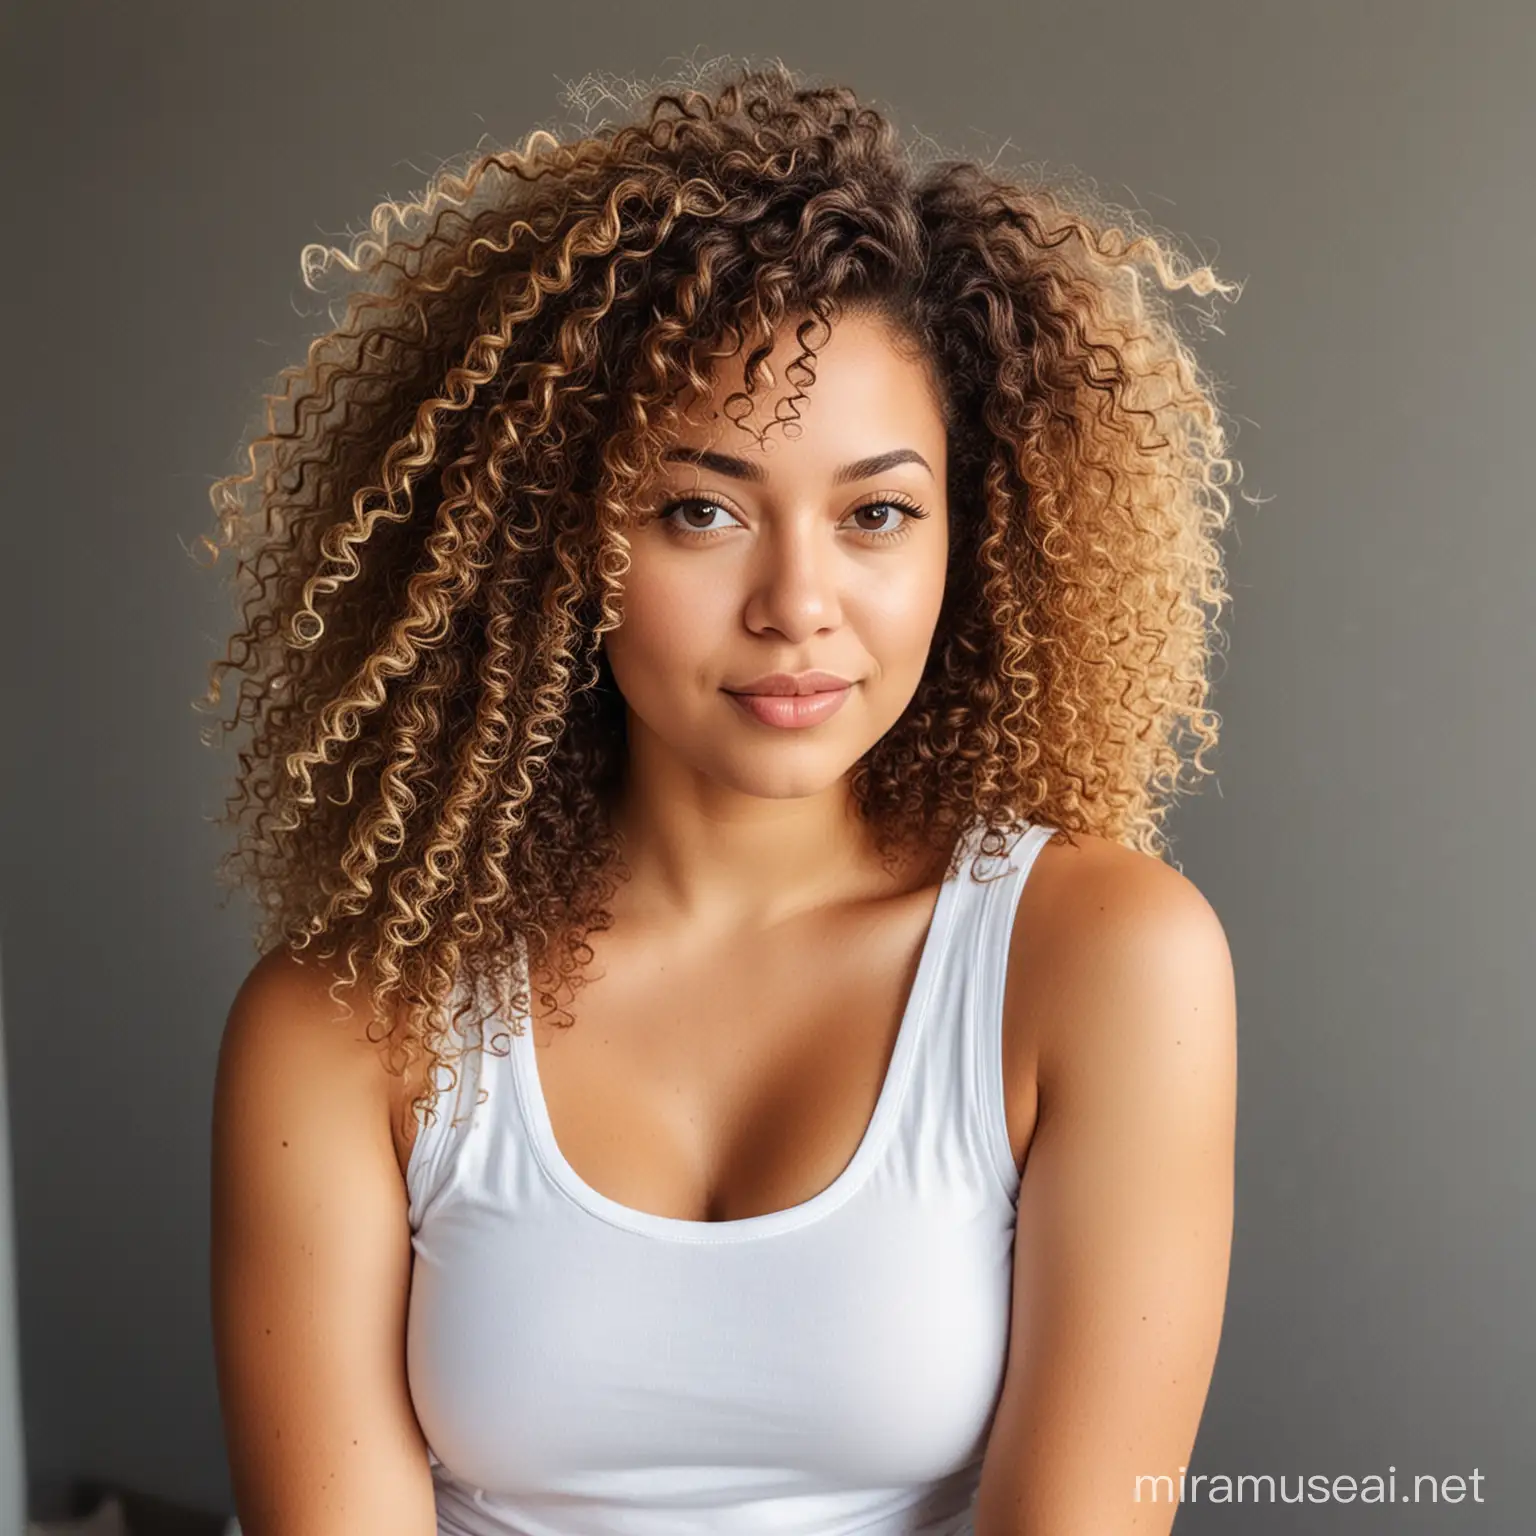 Curvy Woman with Curly Hair in White Tank Top